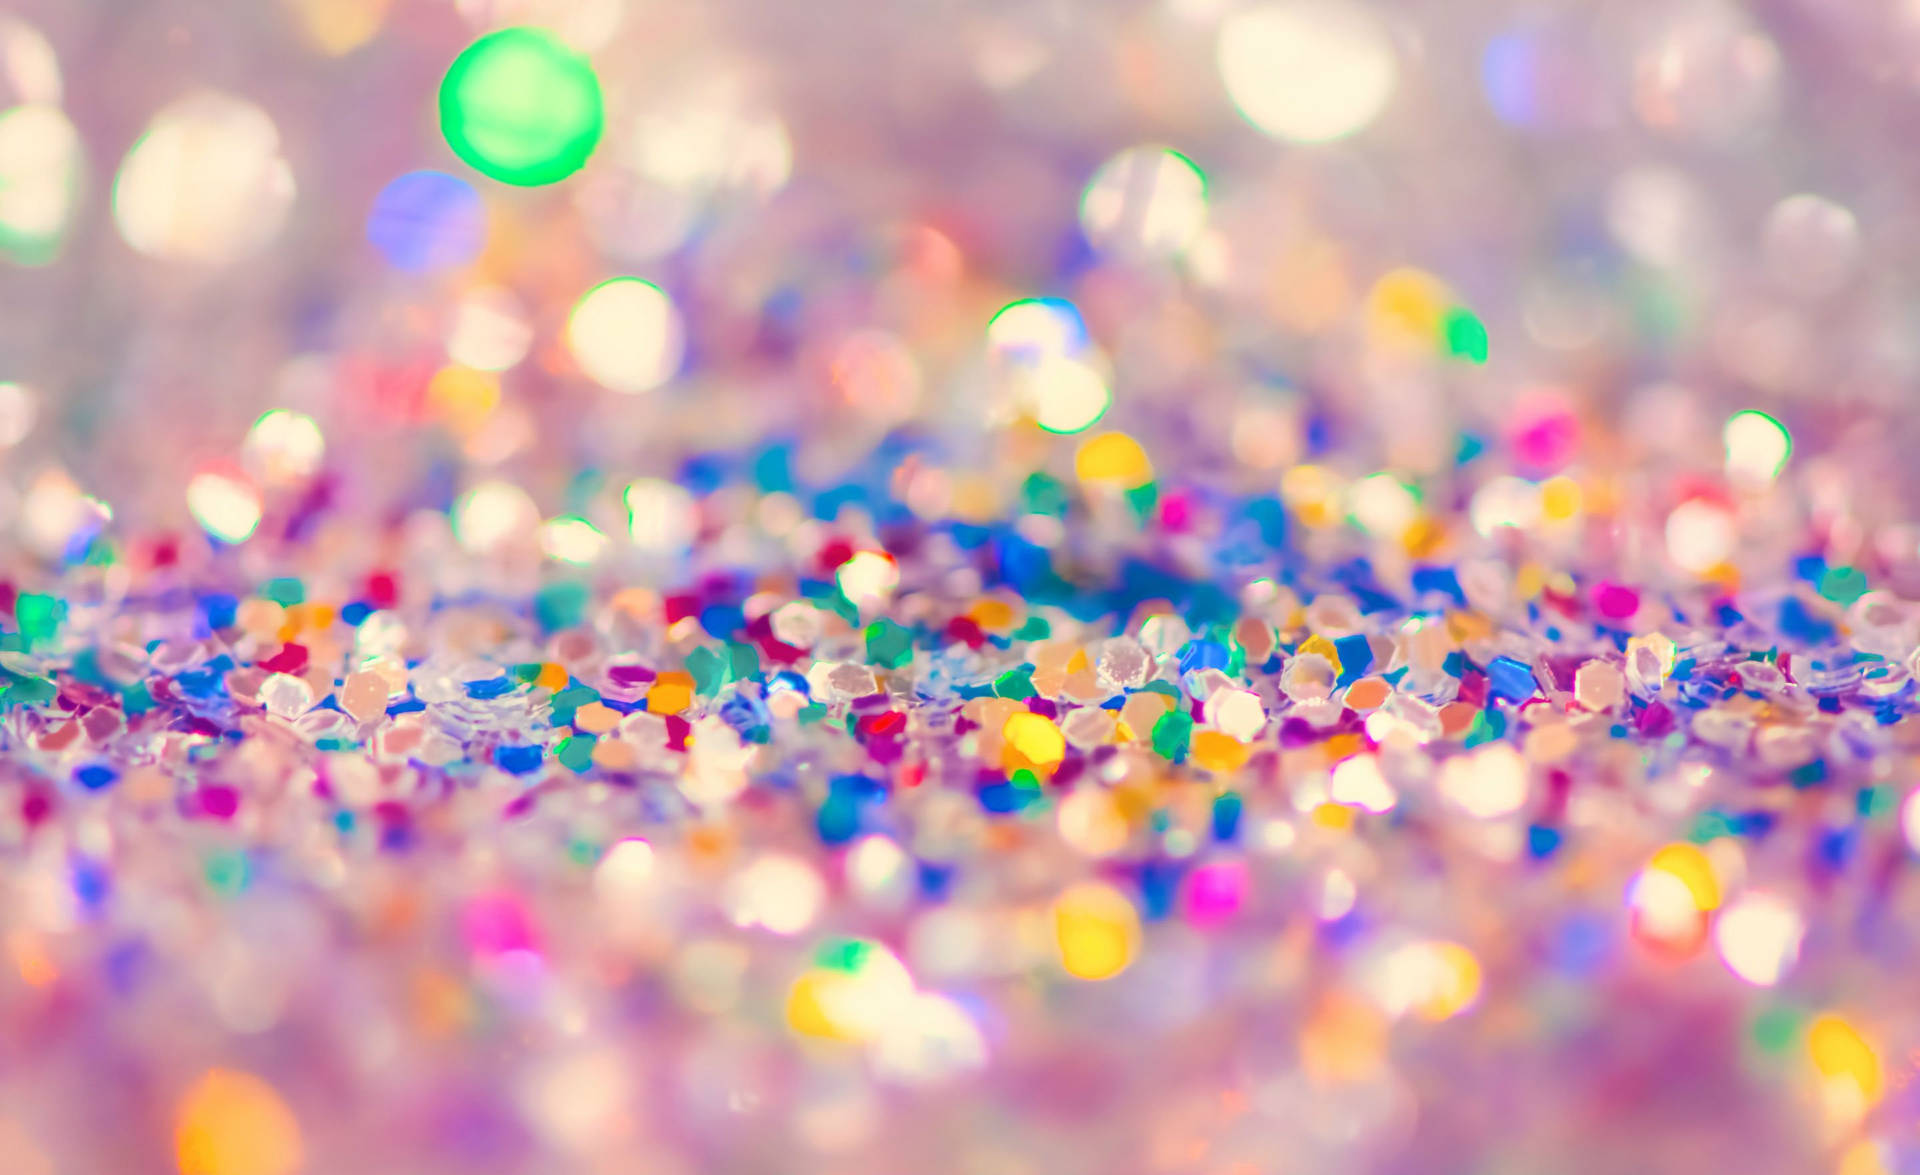 Light up your world with the dazzling hues of a Sparkly night. Wallpaper